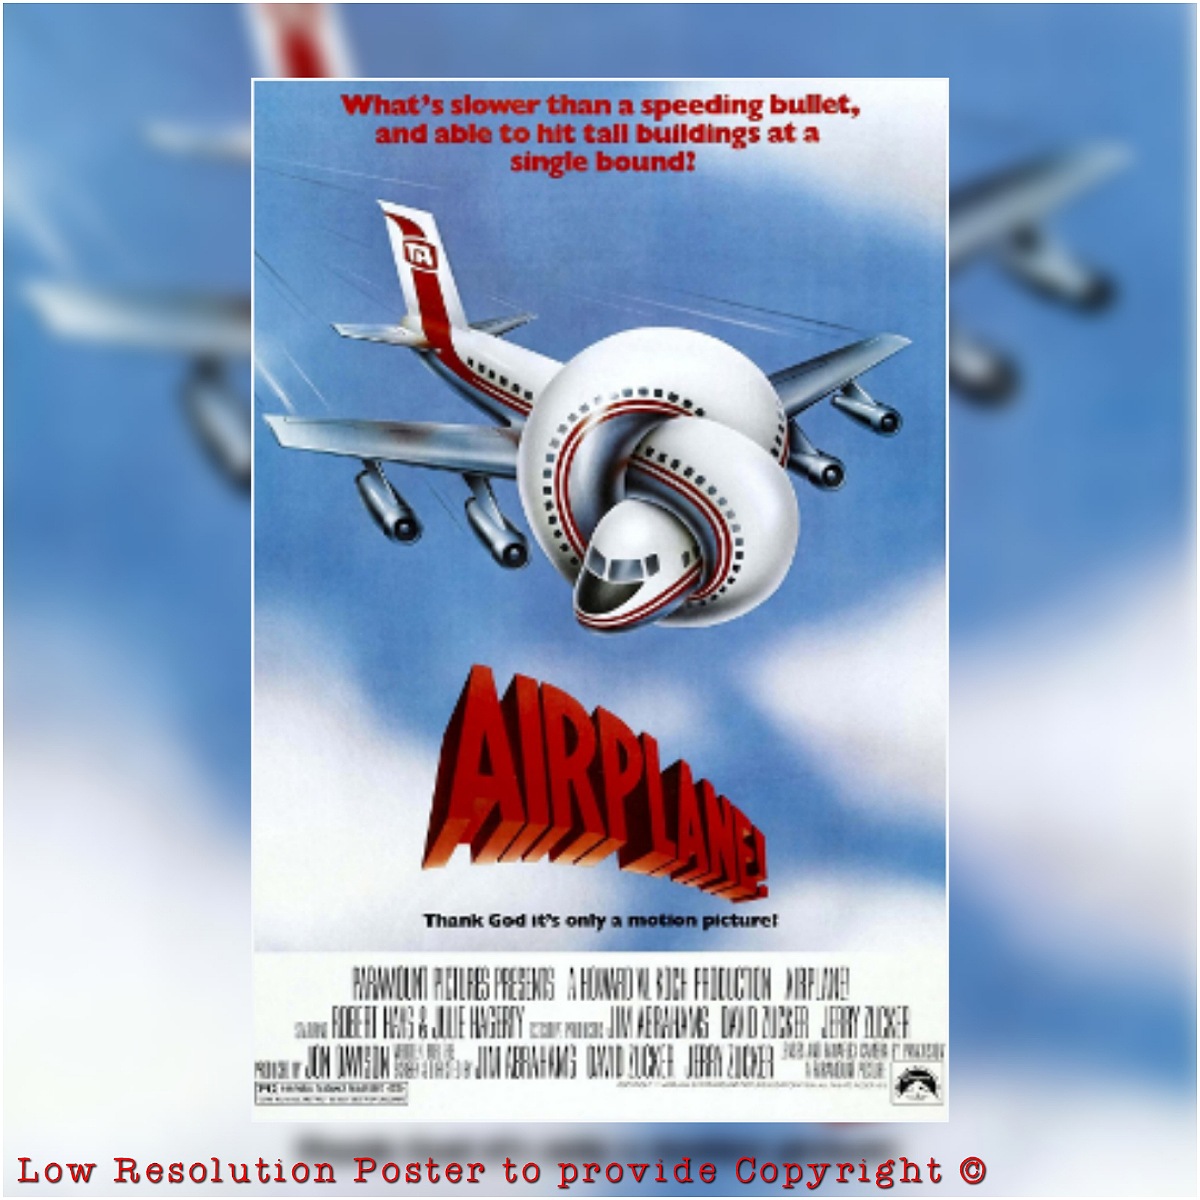 Filmtipp on Nokbew’s blog: The funny movie ‚Airplane‘ – With Leslie Nielsen